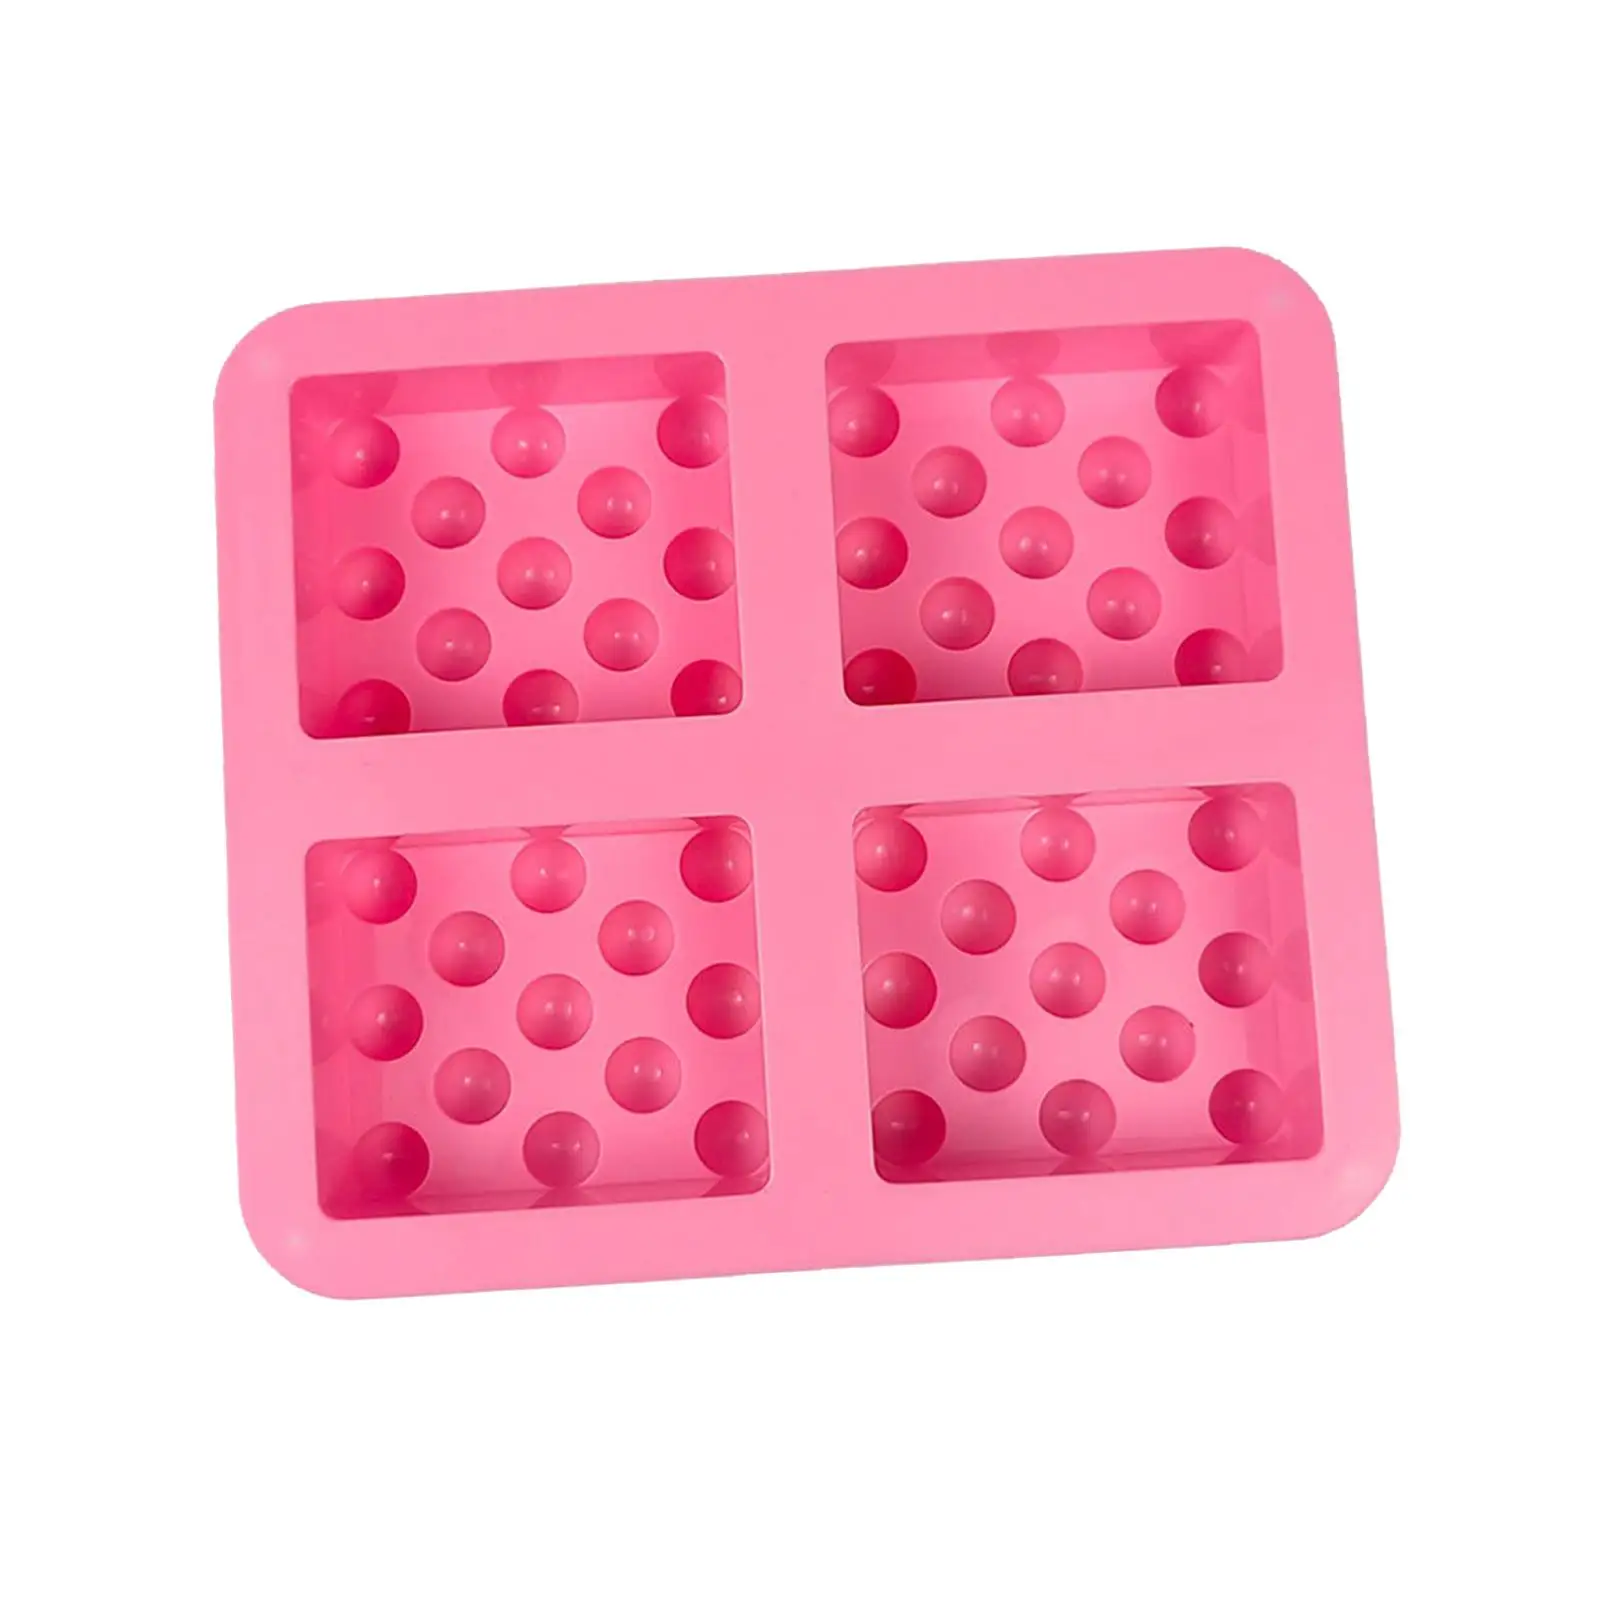 Silicone Soap Mould Resin Casting Art Candle Making Silicone Soap Making Model DIY Crafting Silicone Mould for Kids Accessories